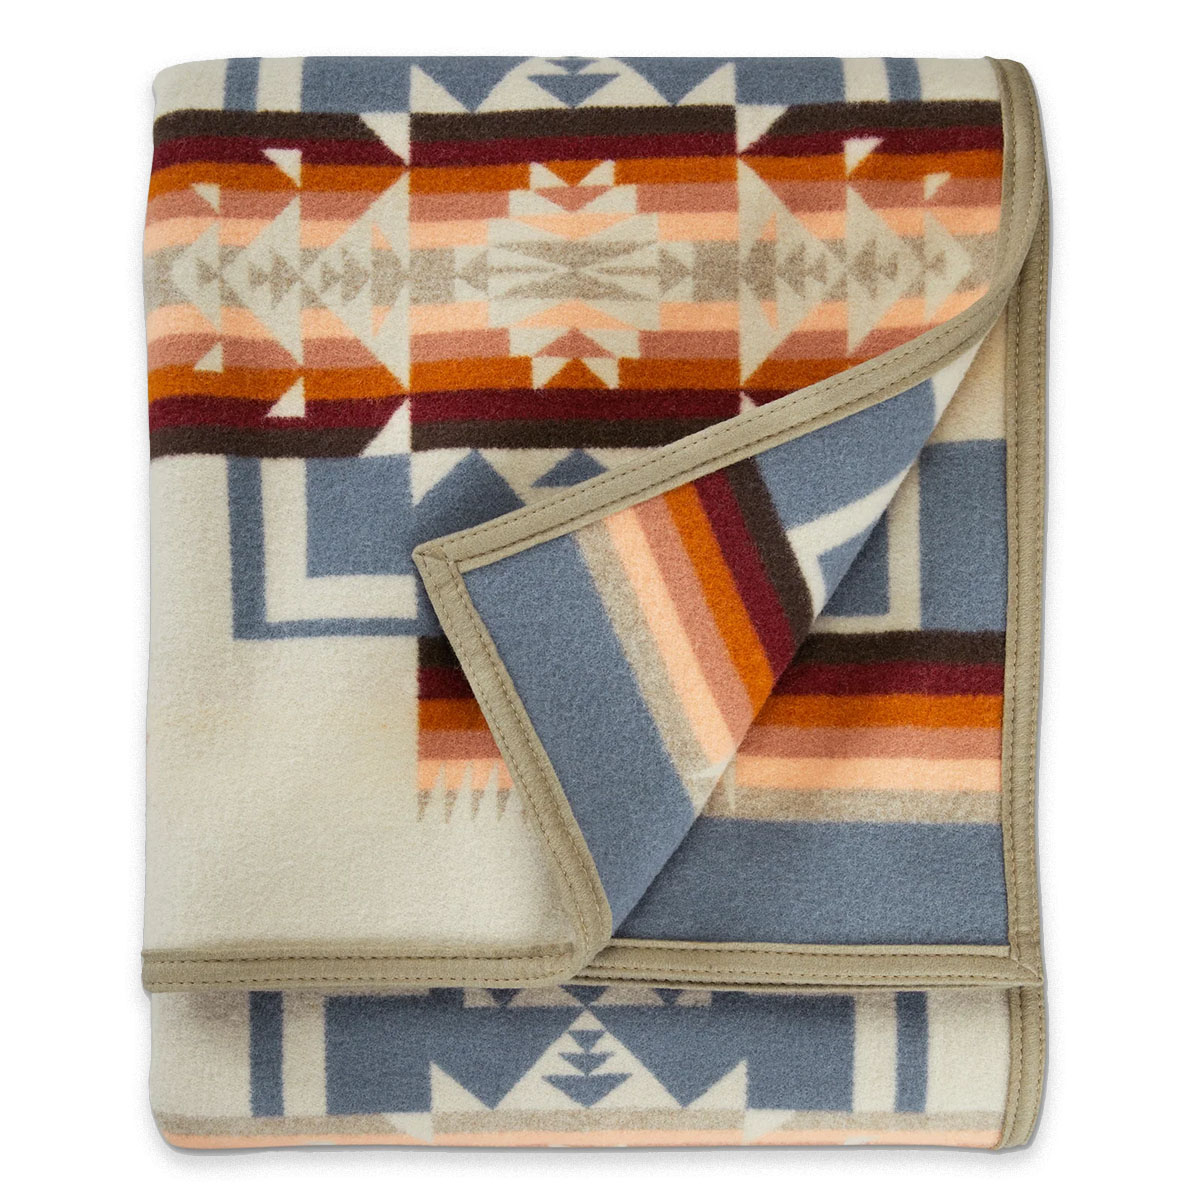 Pendleton Chief Joseph Jacquard Blanket Robe Rosewood, Perfect blanket for chilly night